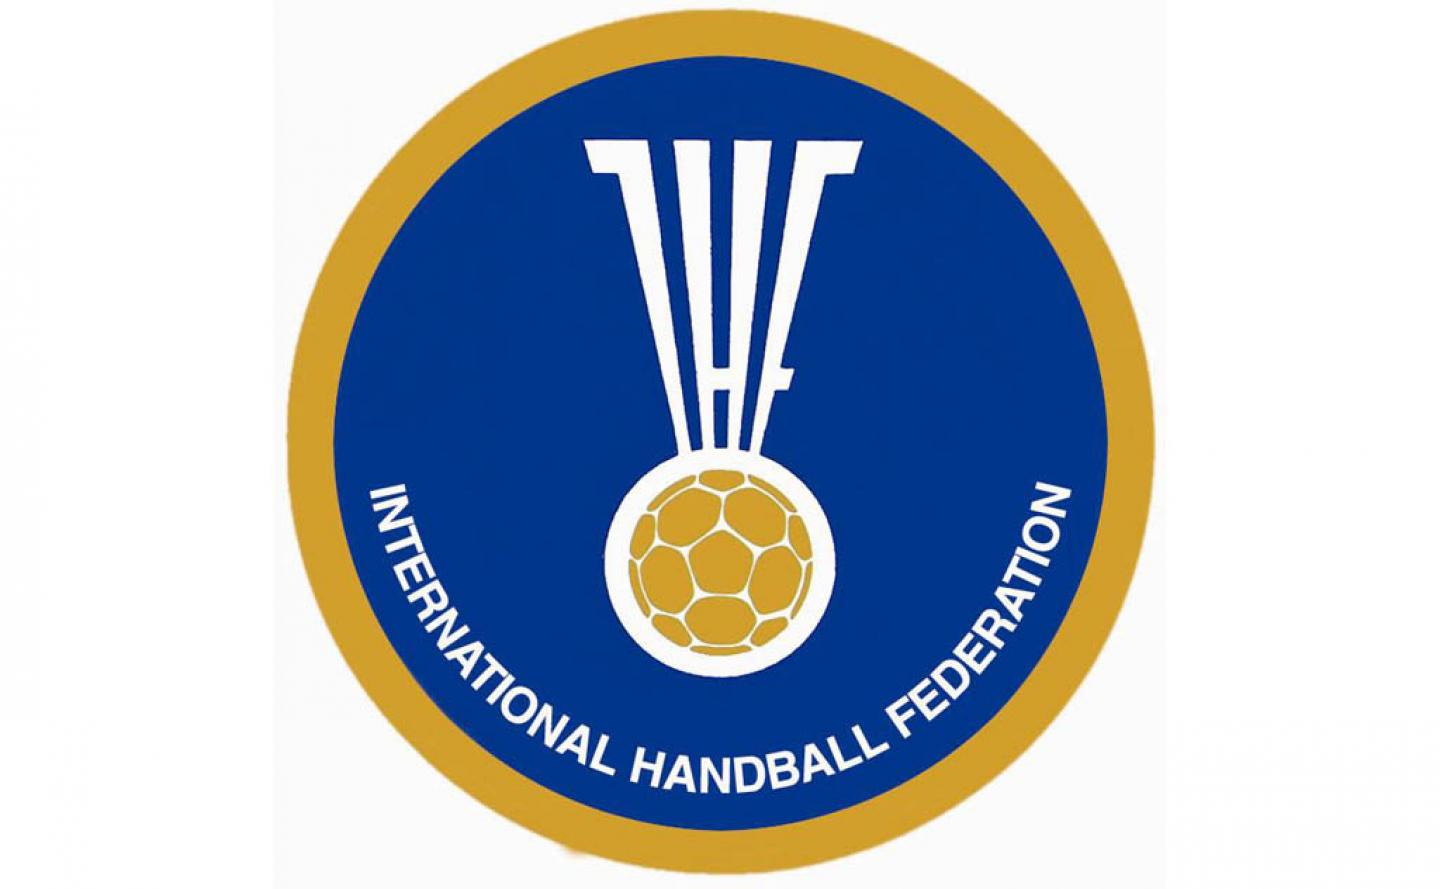 Vote for the Grundfos World Handball Player of the Year 2013